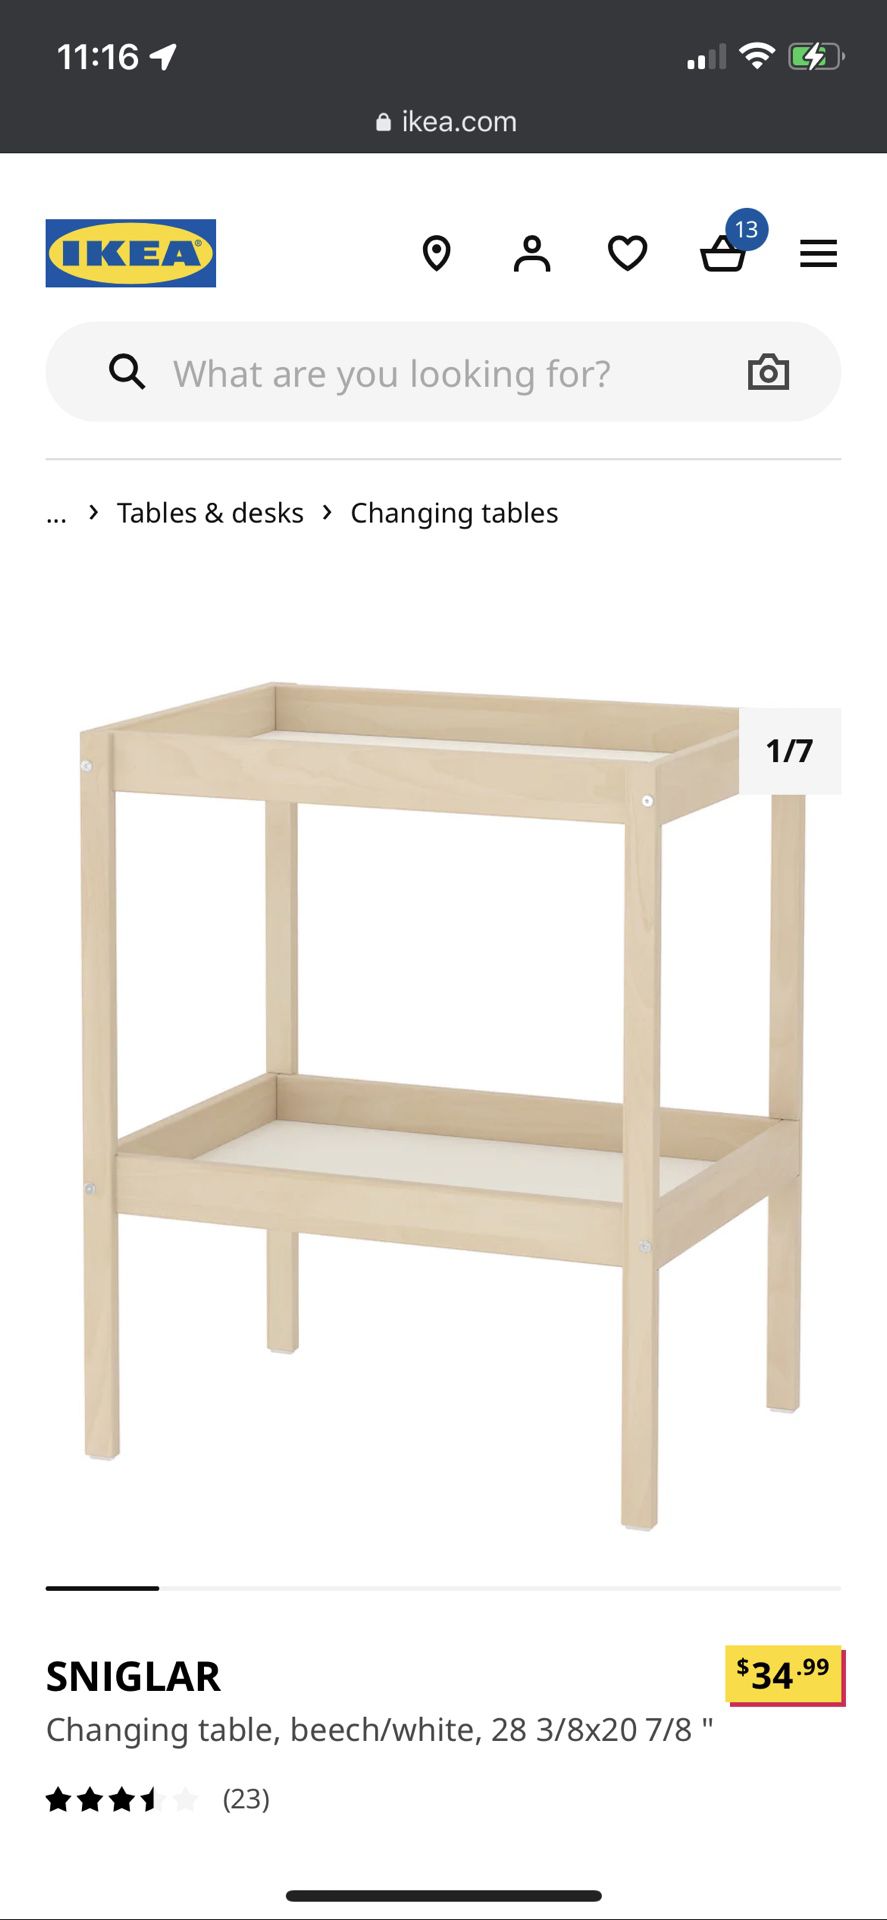 Ikea SNIGLAR Changing table With The Pad And Cover